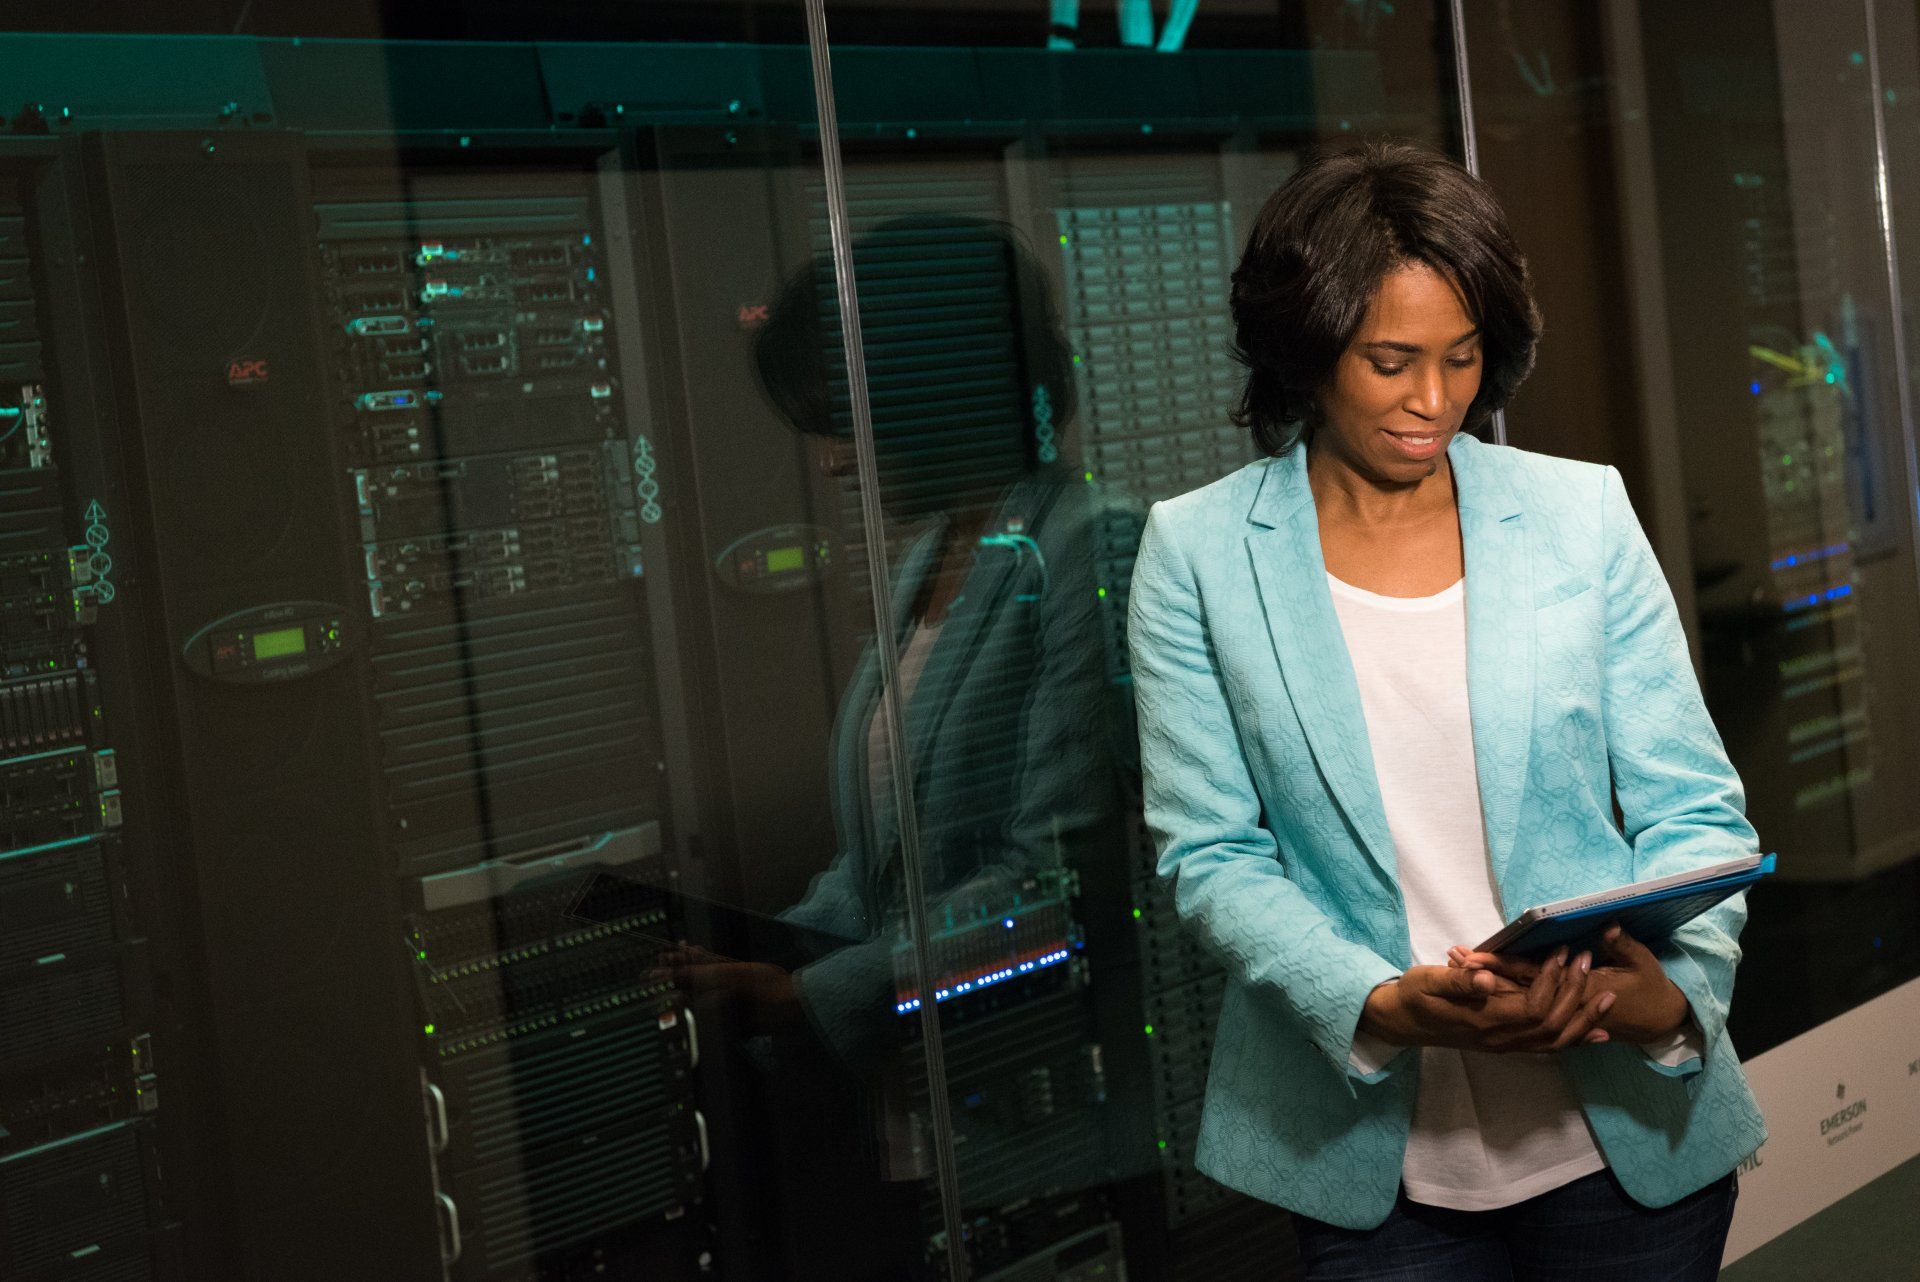 a woman in a blue jacket is holding a tablet in a server room .